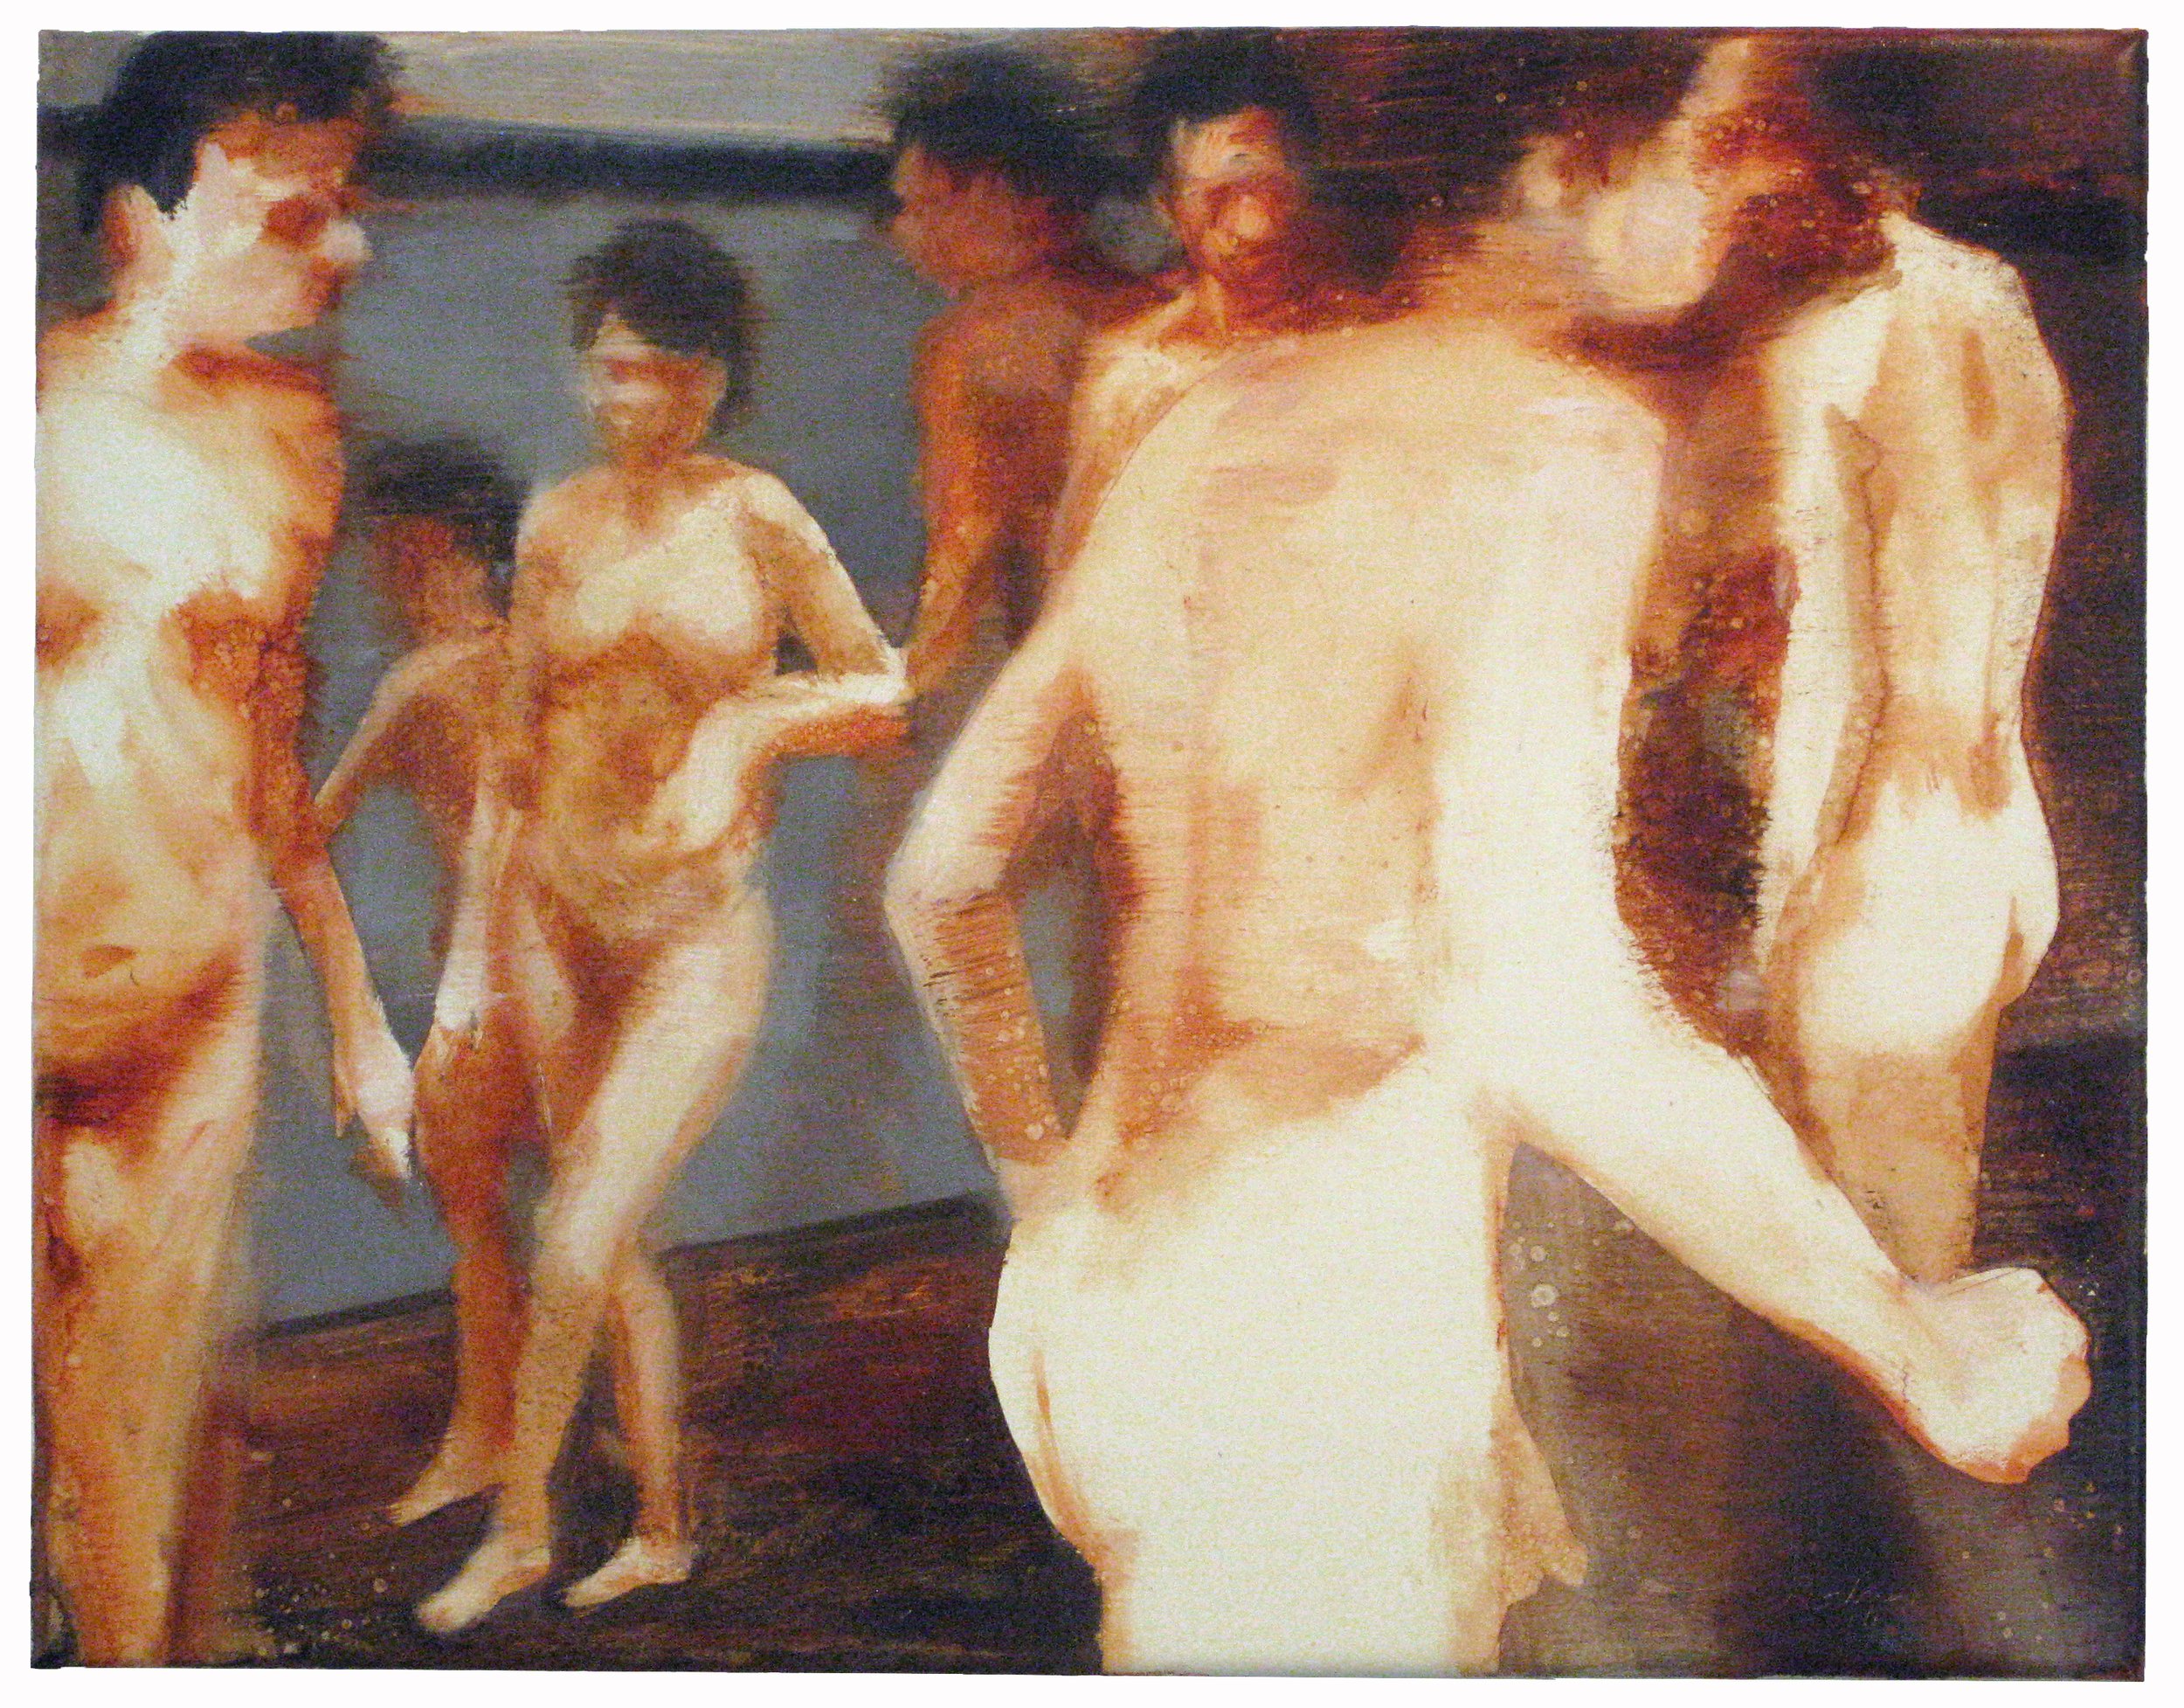  Dancers 1 11x14 inches (28x35.5 cm) Oil on linen 2014 